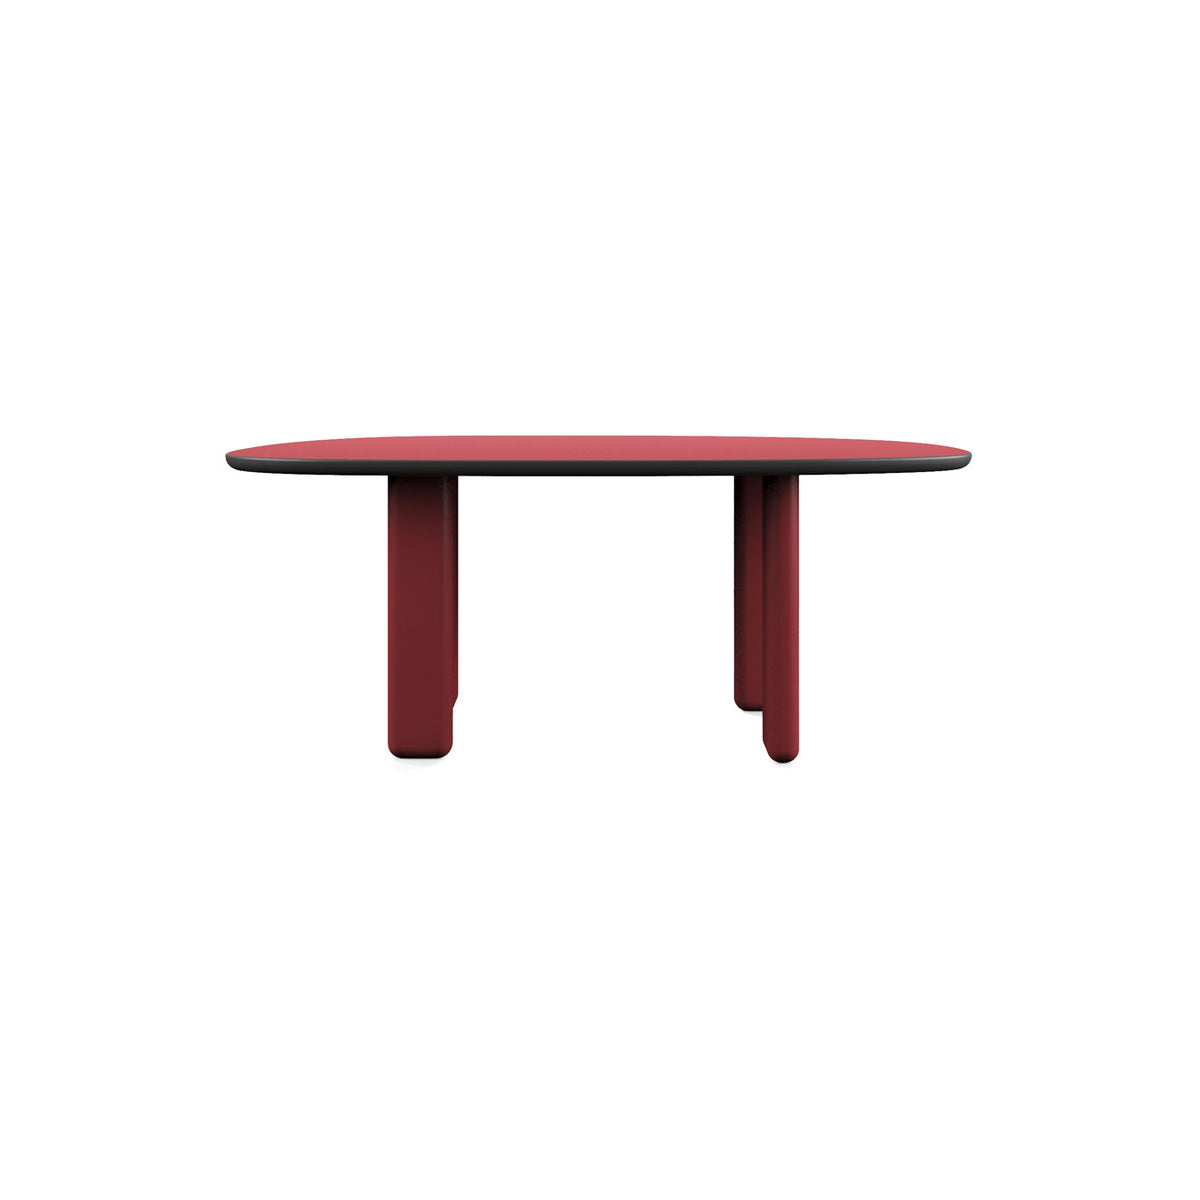 Caillou Table